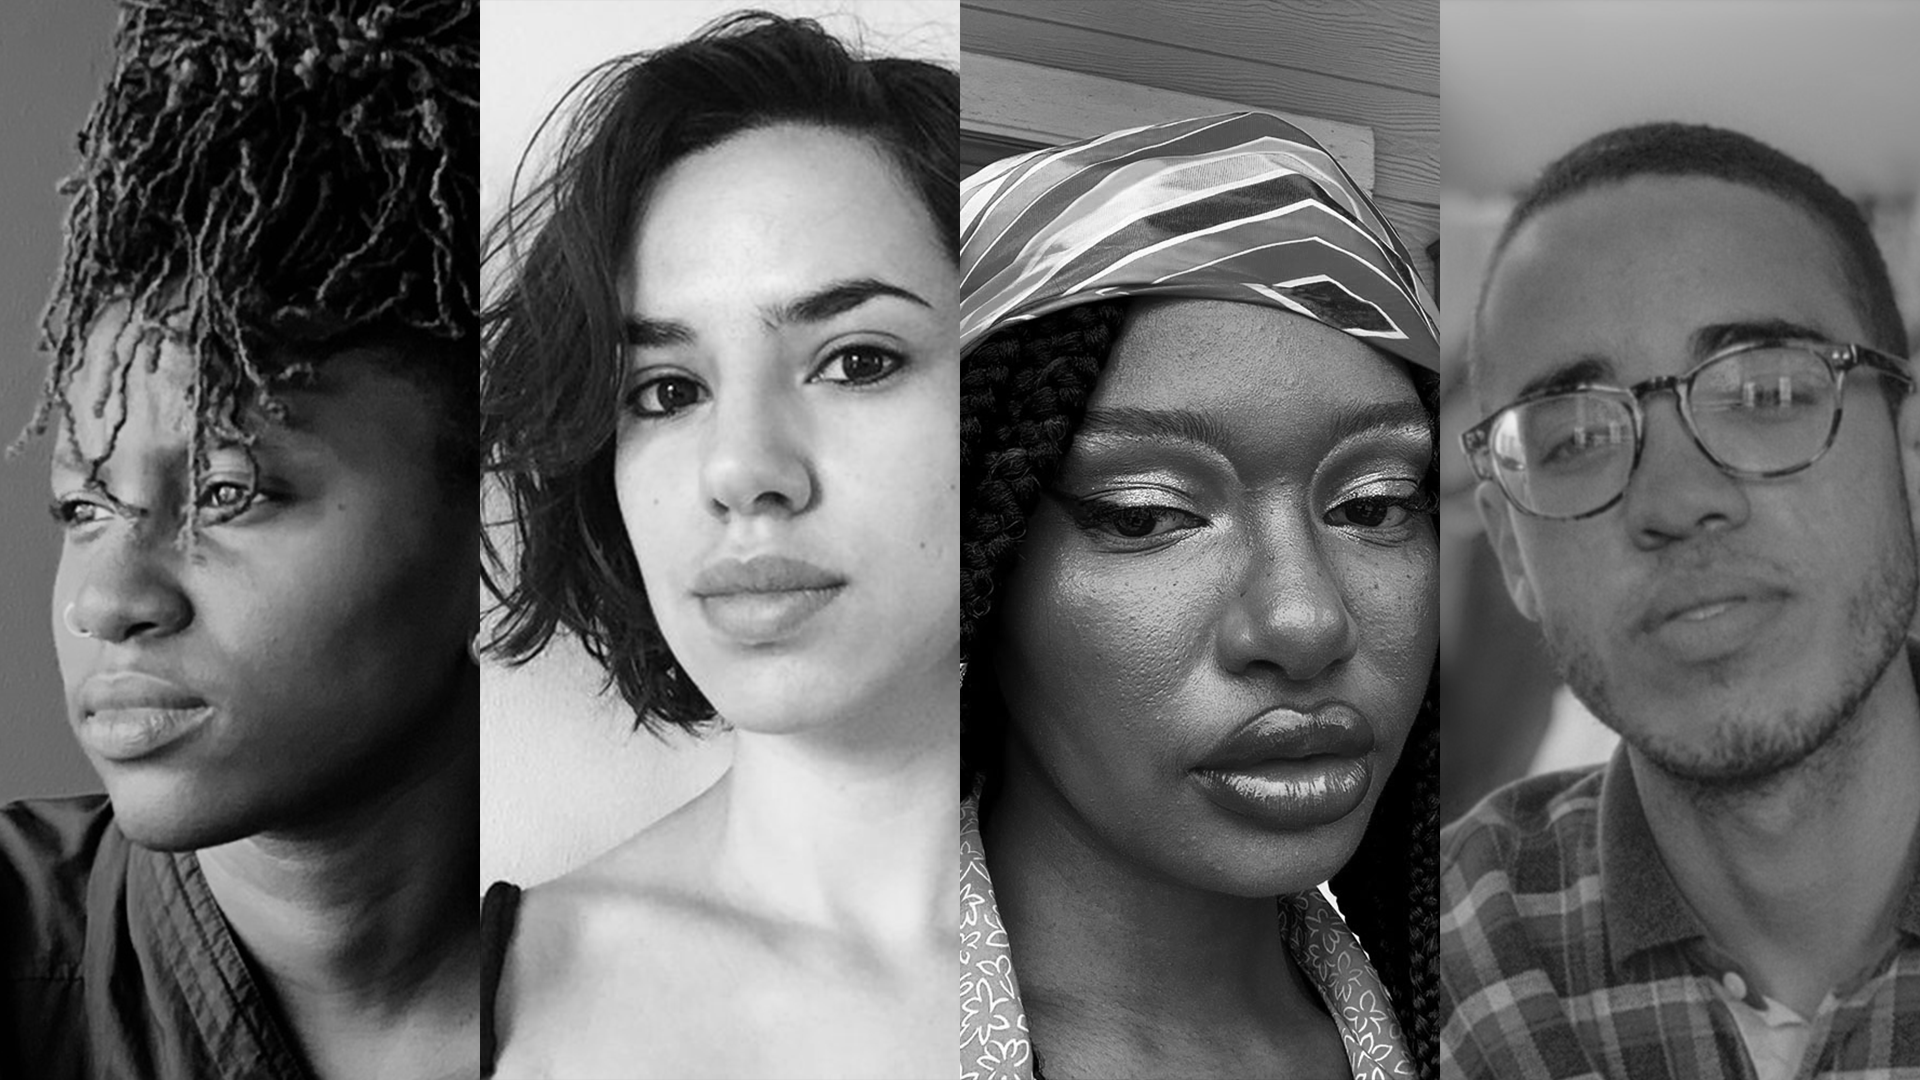 A collage of four individual headshots, all represented in black and white.